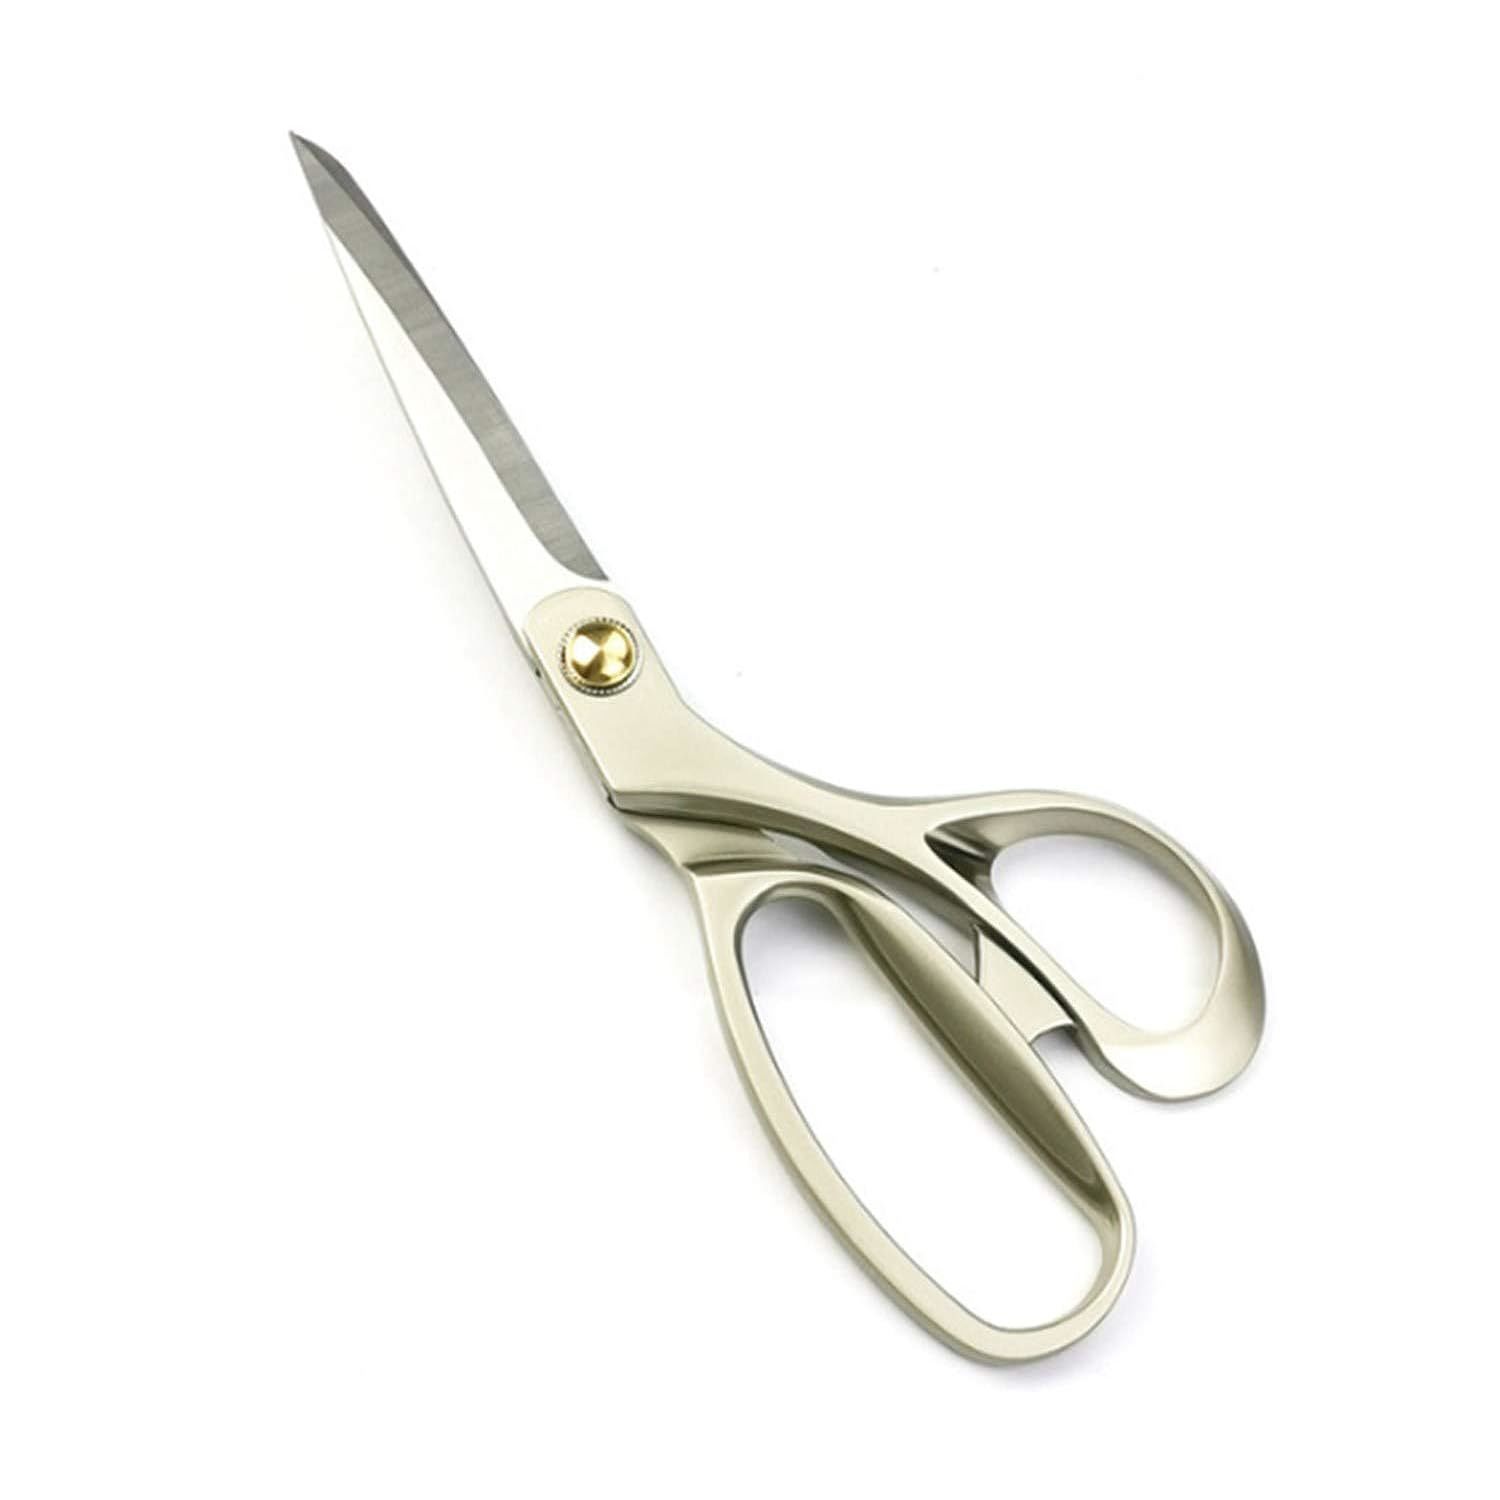 1pc Red Stainless Steel Multi-purpose Scissors, Super Sharp Kitchen Shears,  Sewing Scissors, Craft Scissors For Students